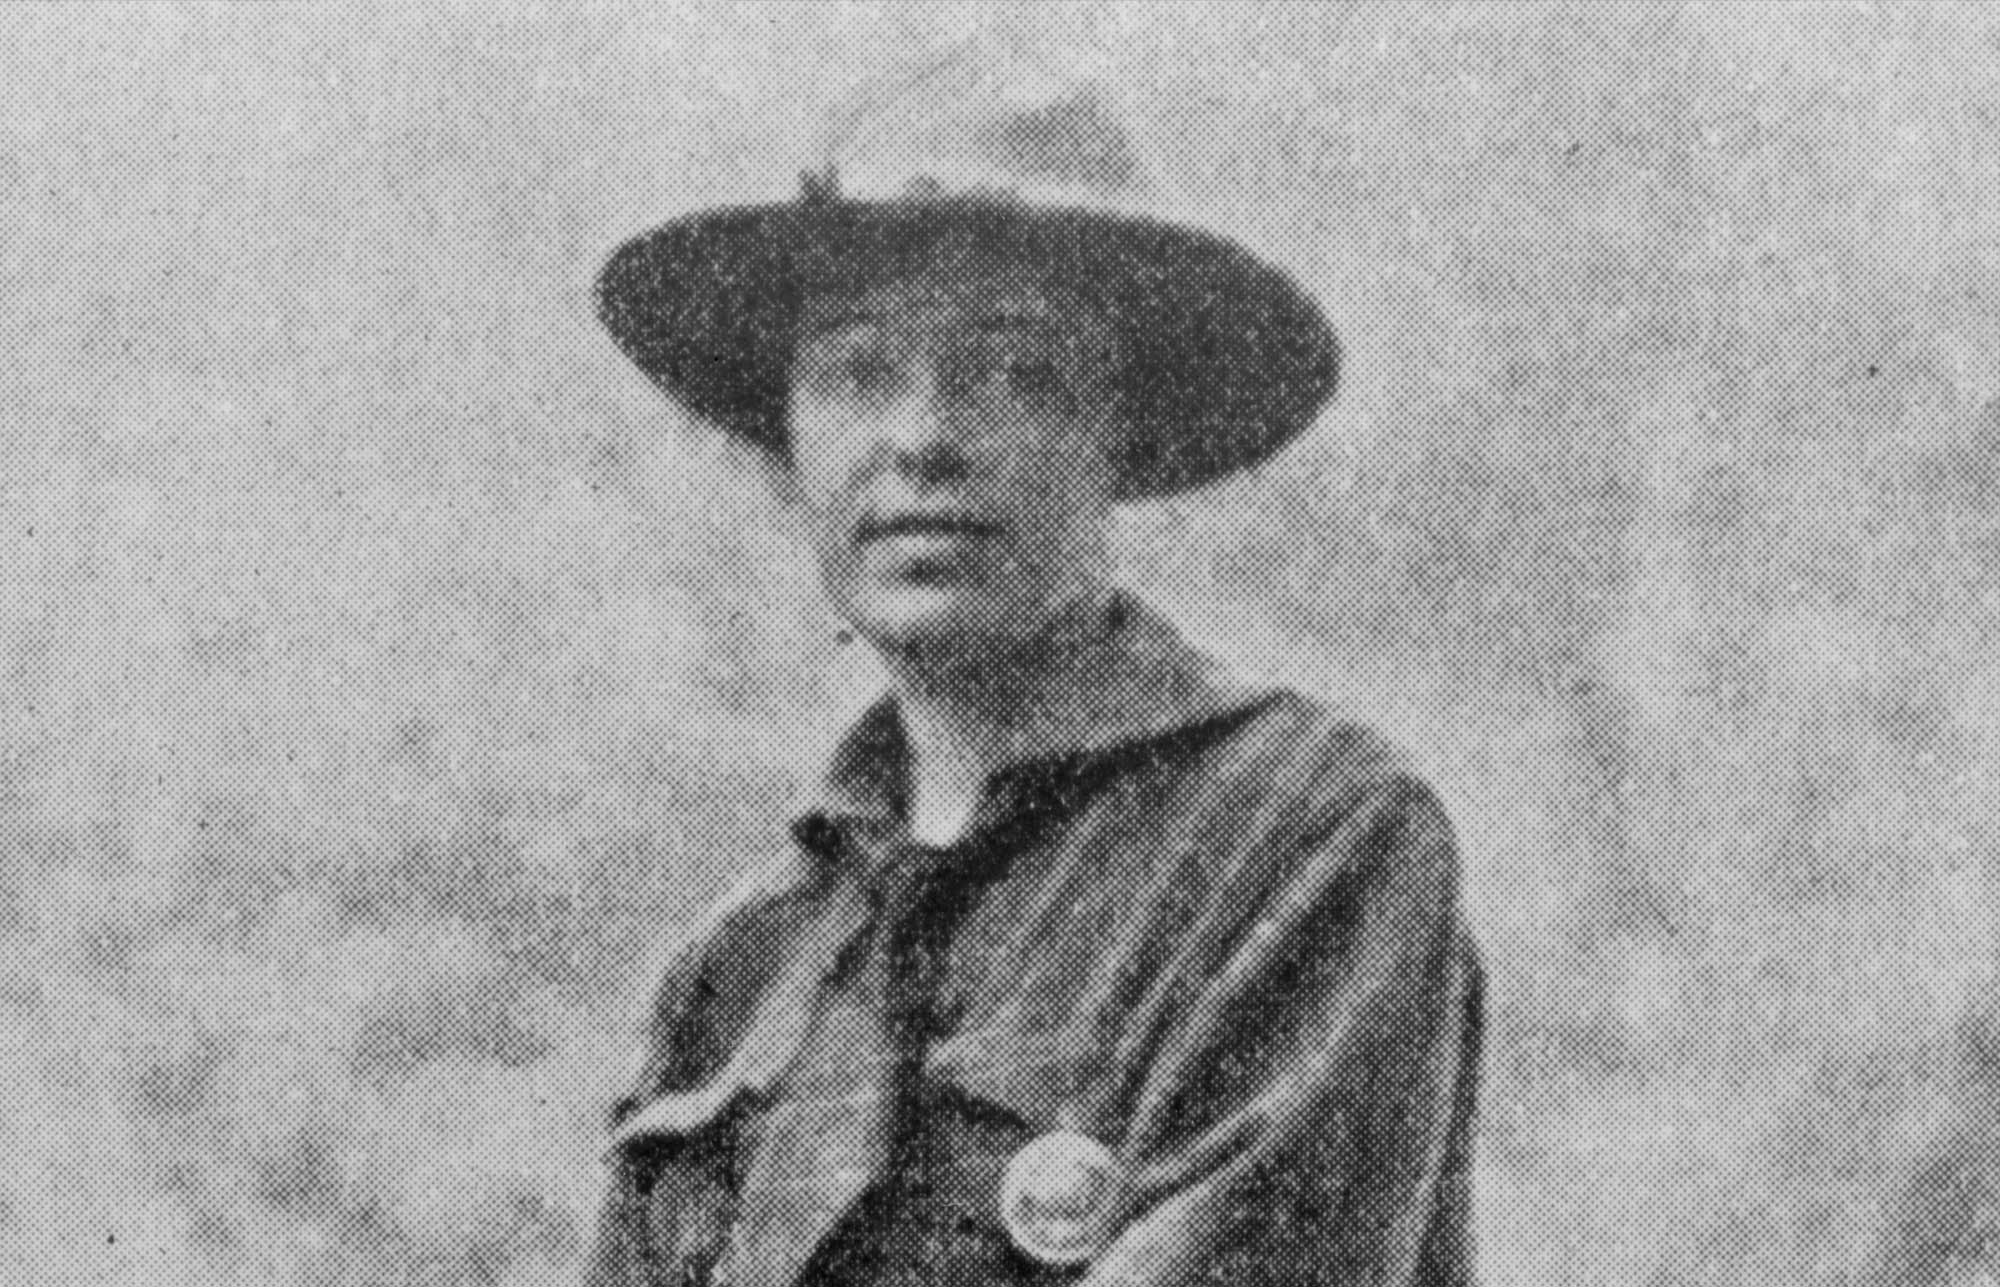 Clare Hodges on horseback wearing a split skirt, shirt, bandana, gloves, and a flat brim hat with a round badge pinned on the pocket.